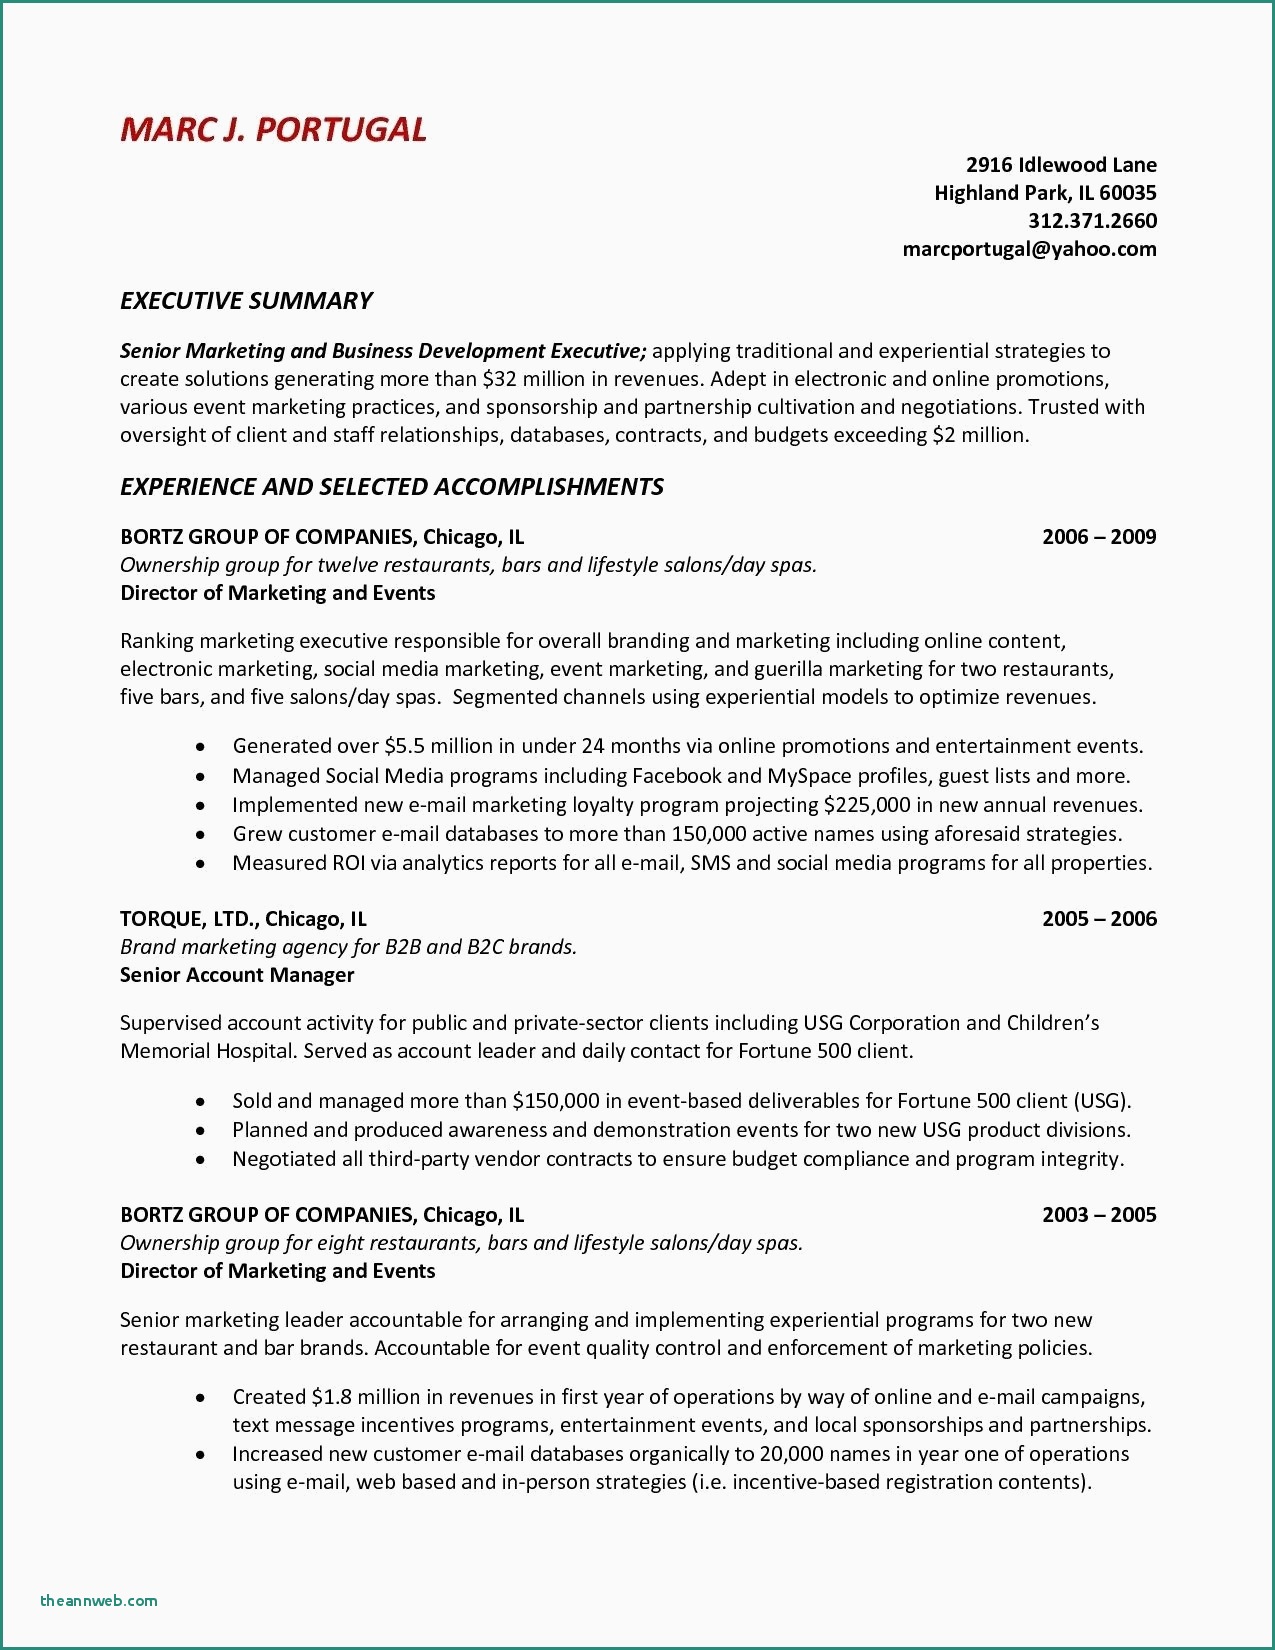 Good Objective For Resume Job Objective For Resume General Objectives For Resume Awesome Good Objective Resume Of Job Objective For Resume good objective for resume|wikiresume.com